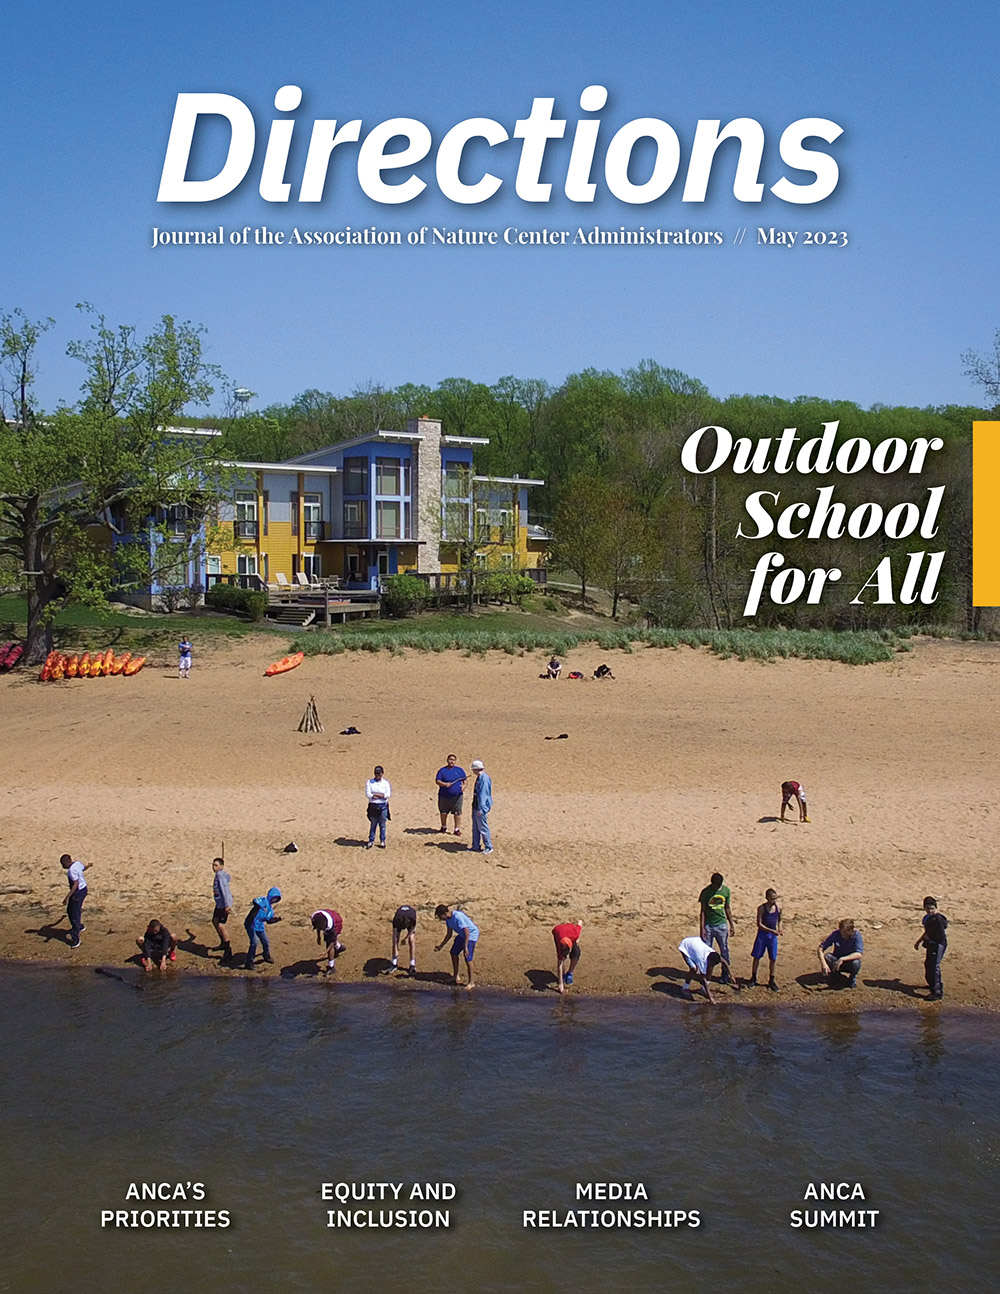 The cover of Directions. A picture of a beach with thirteen people lined up at the waterside.